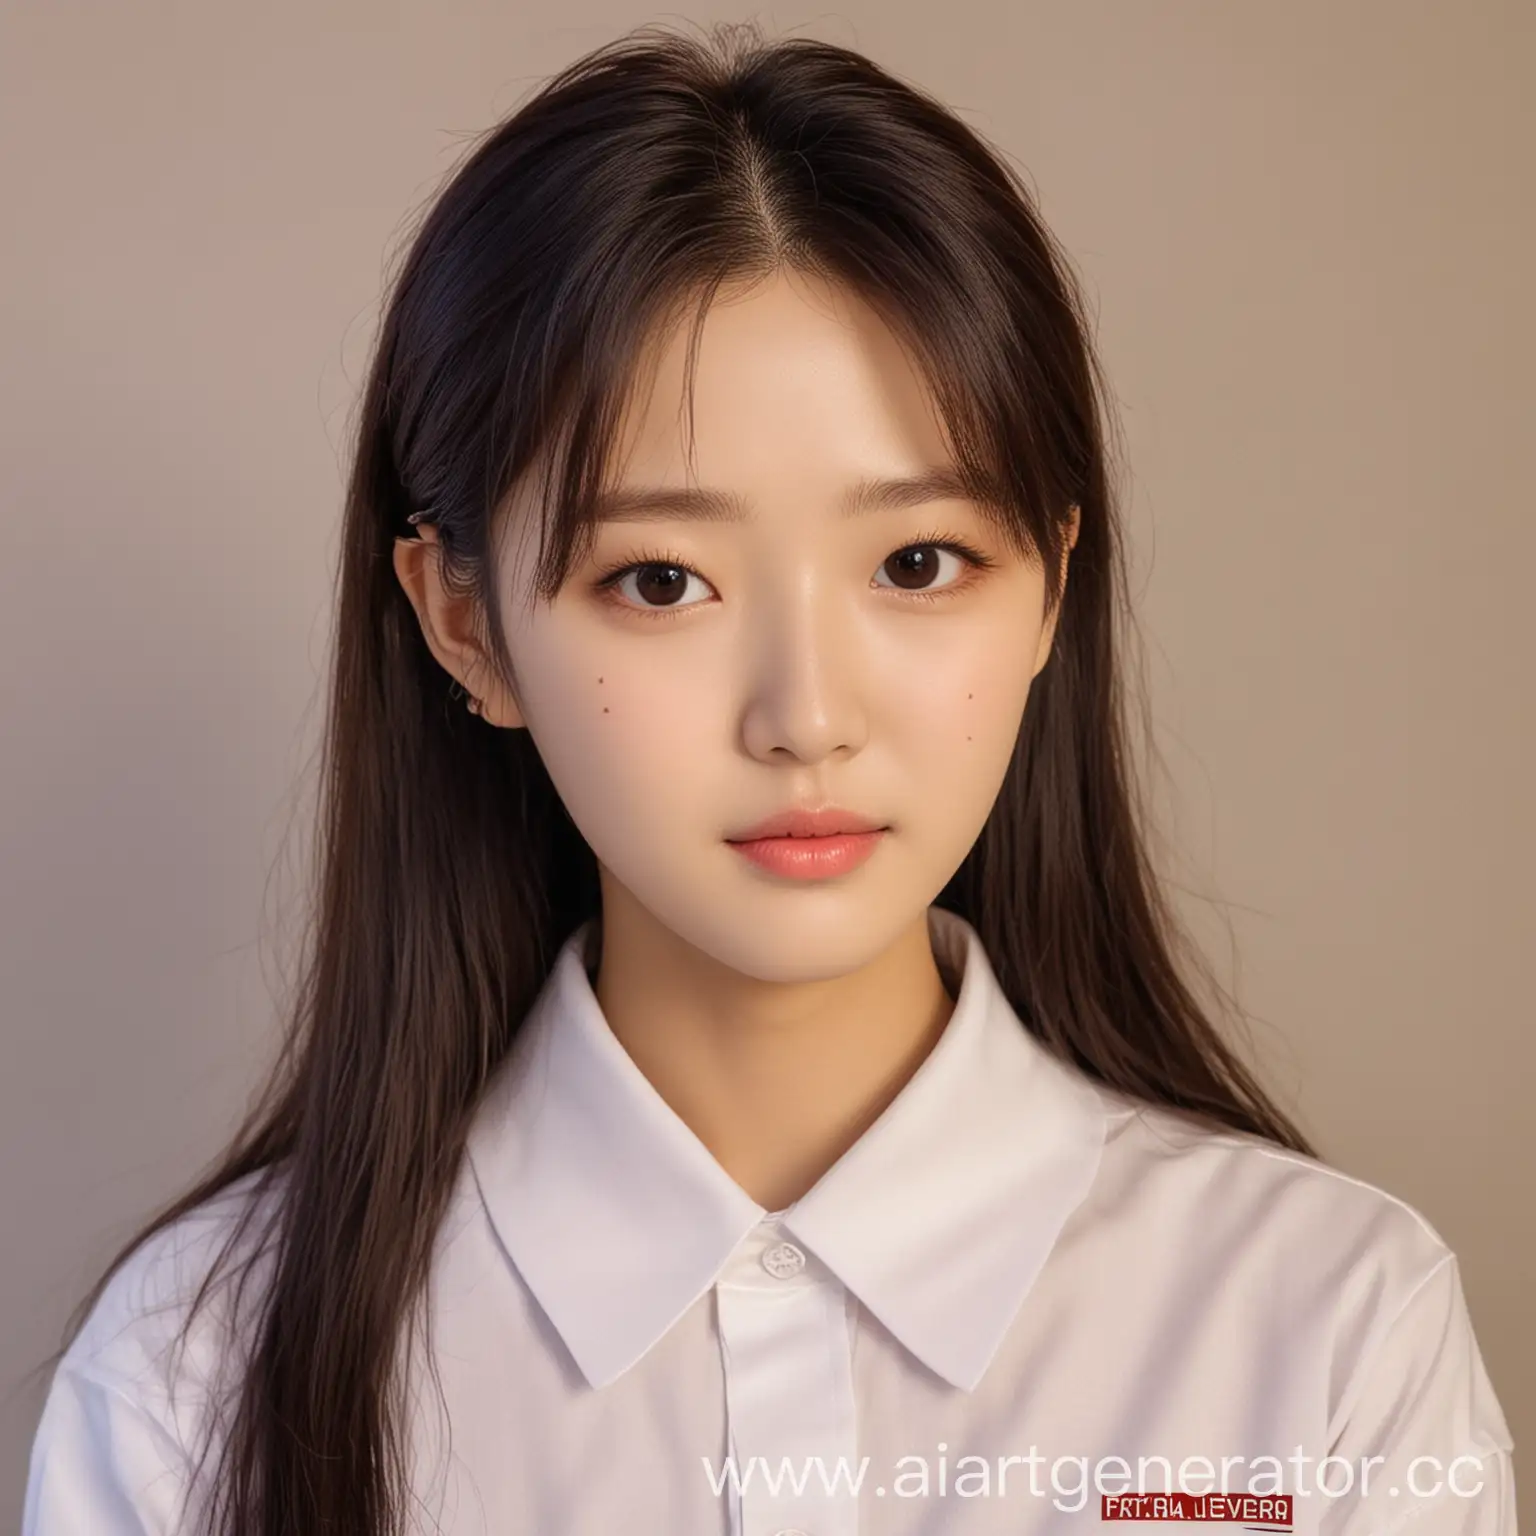 Warm-Portrait-of-a-Kind-Girl-with-Korean-Appearance